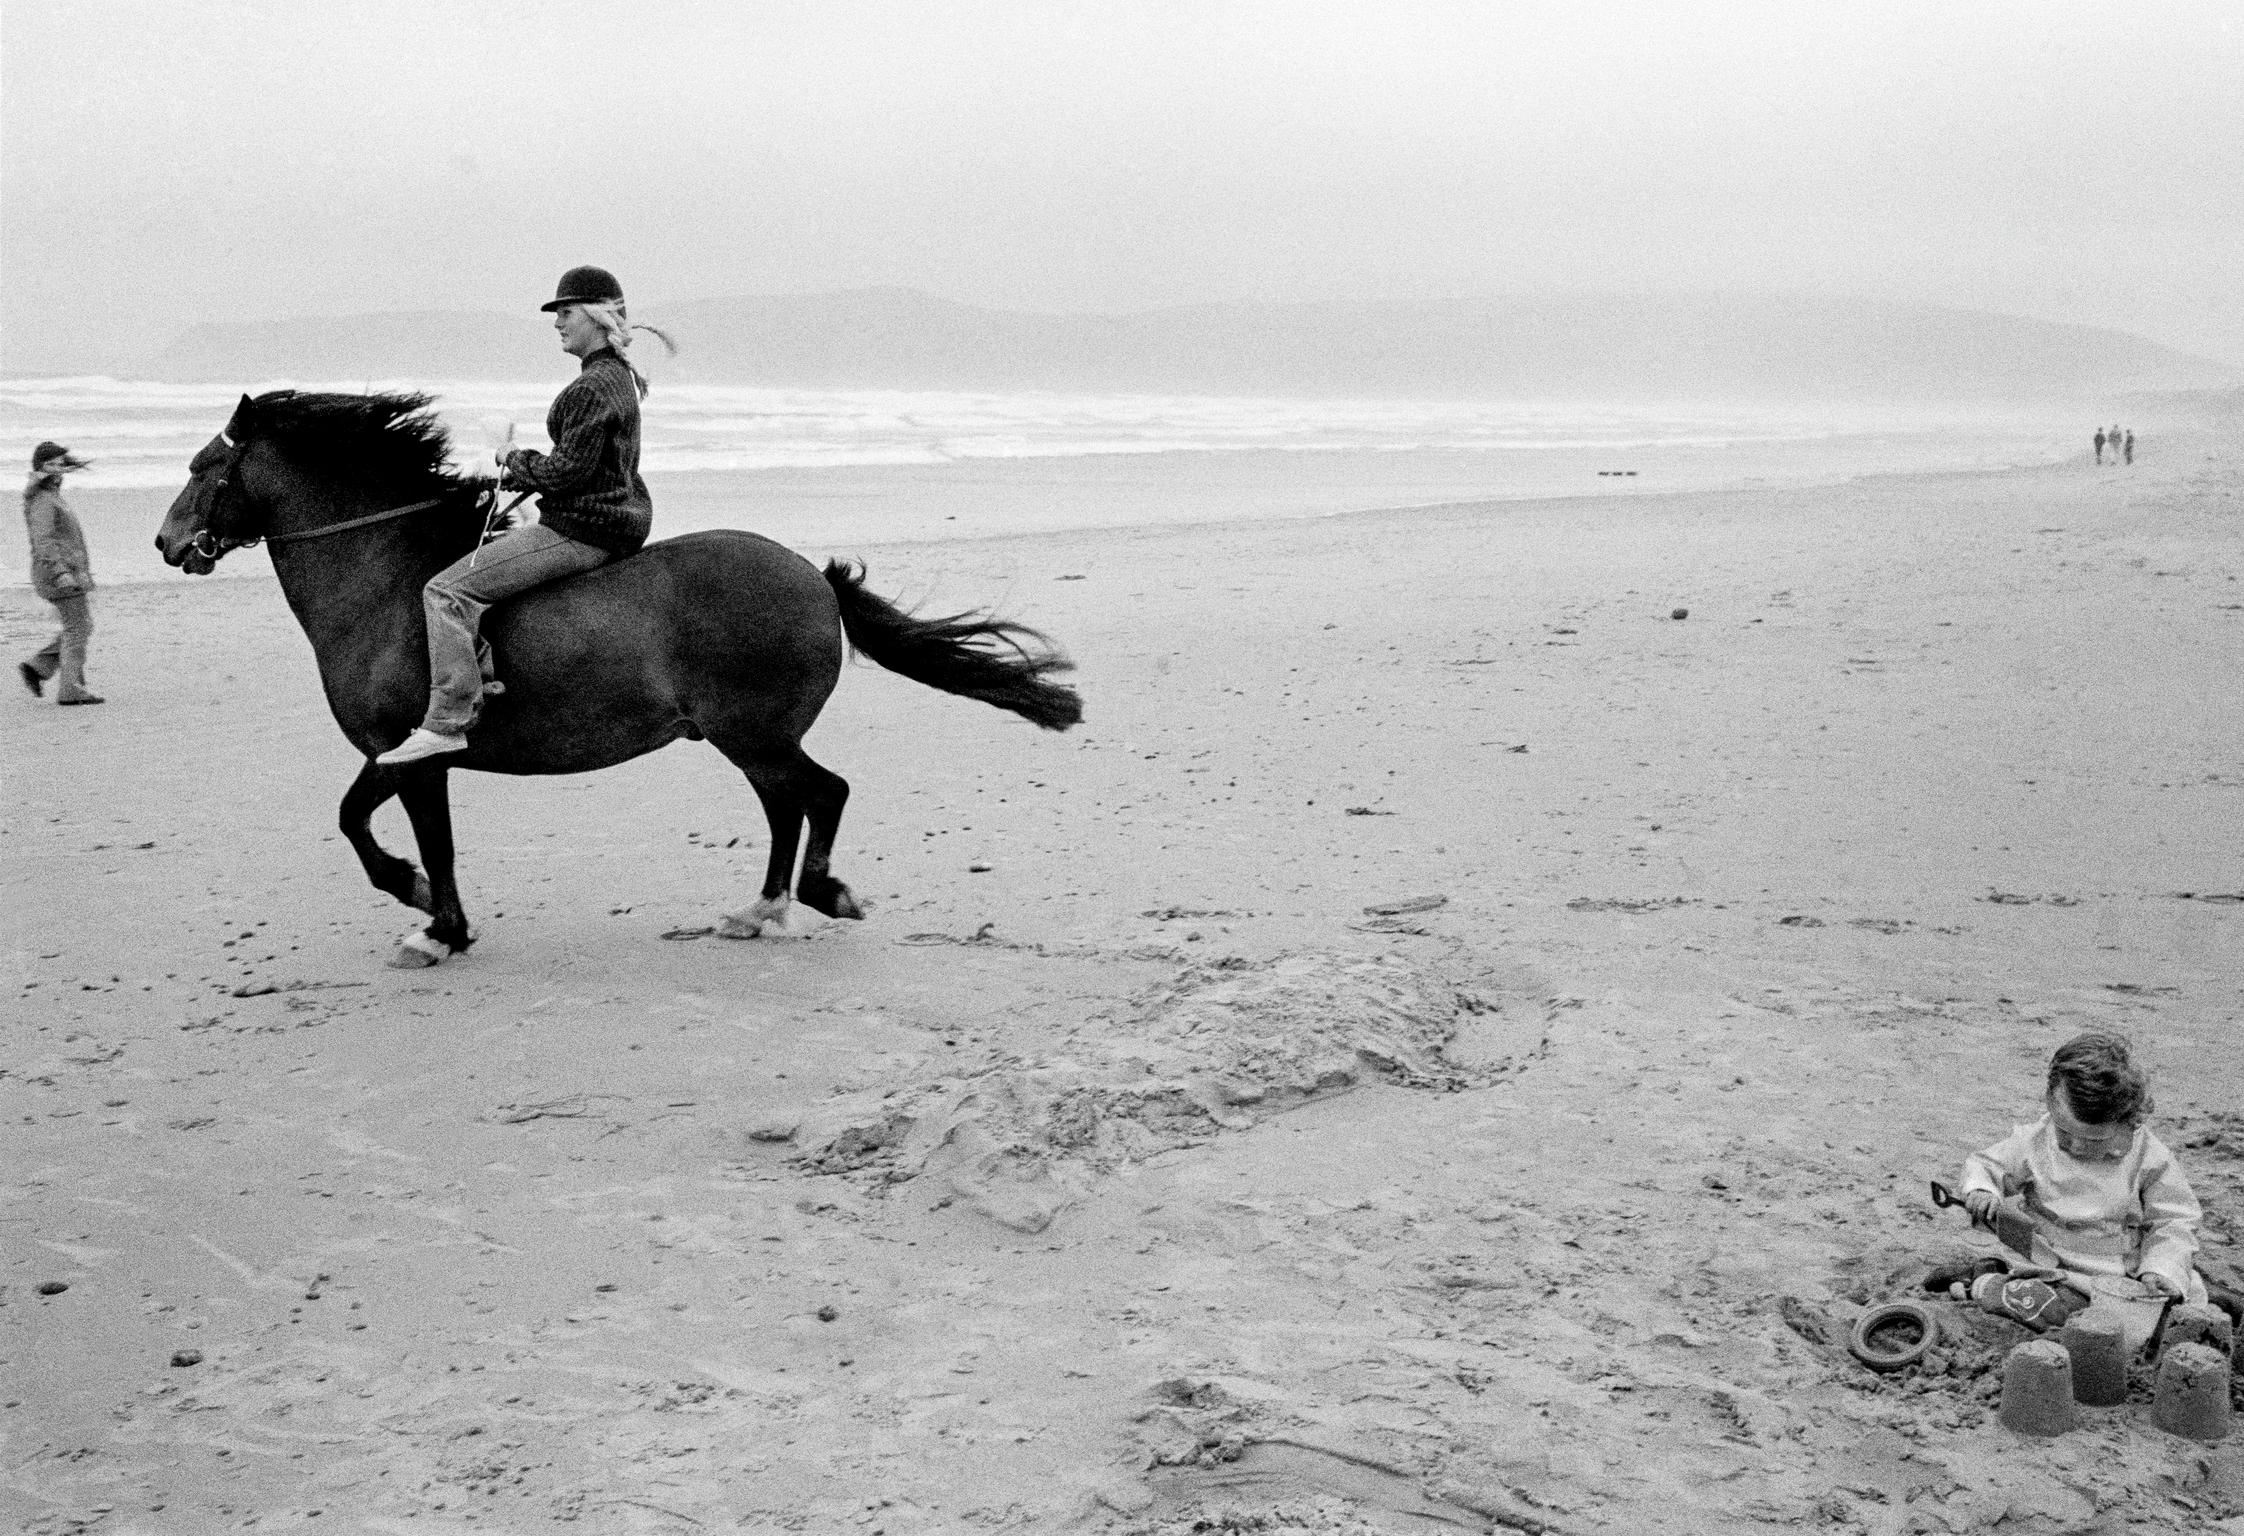 Wind, horse and sandcastles. Abersoch Beach, Wales